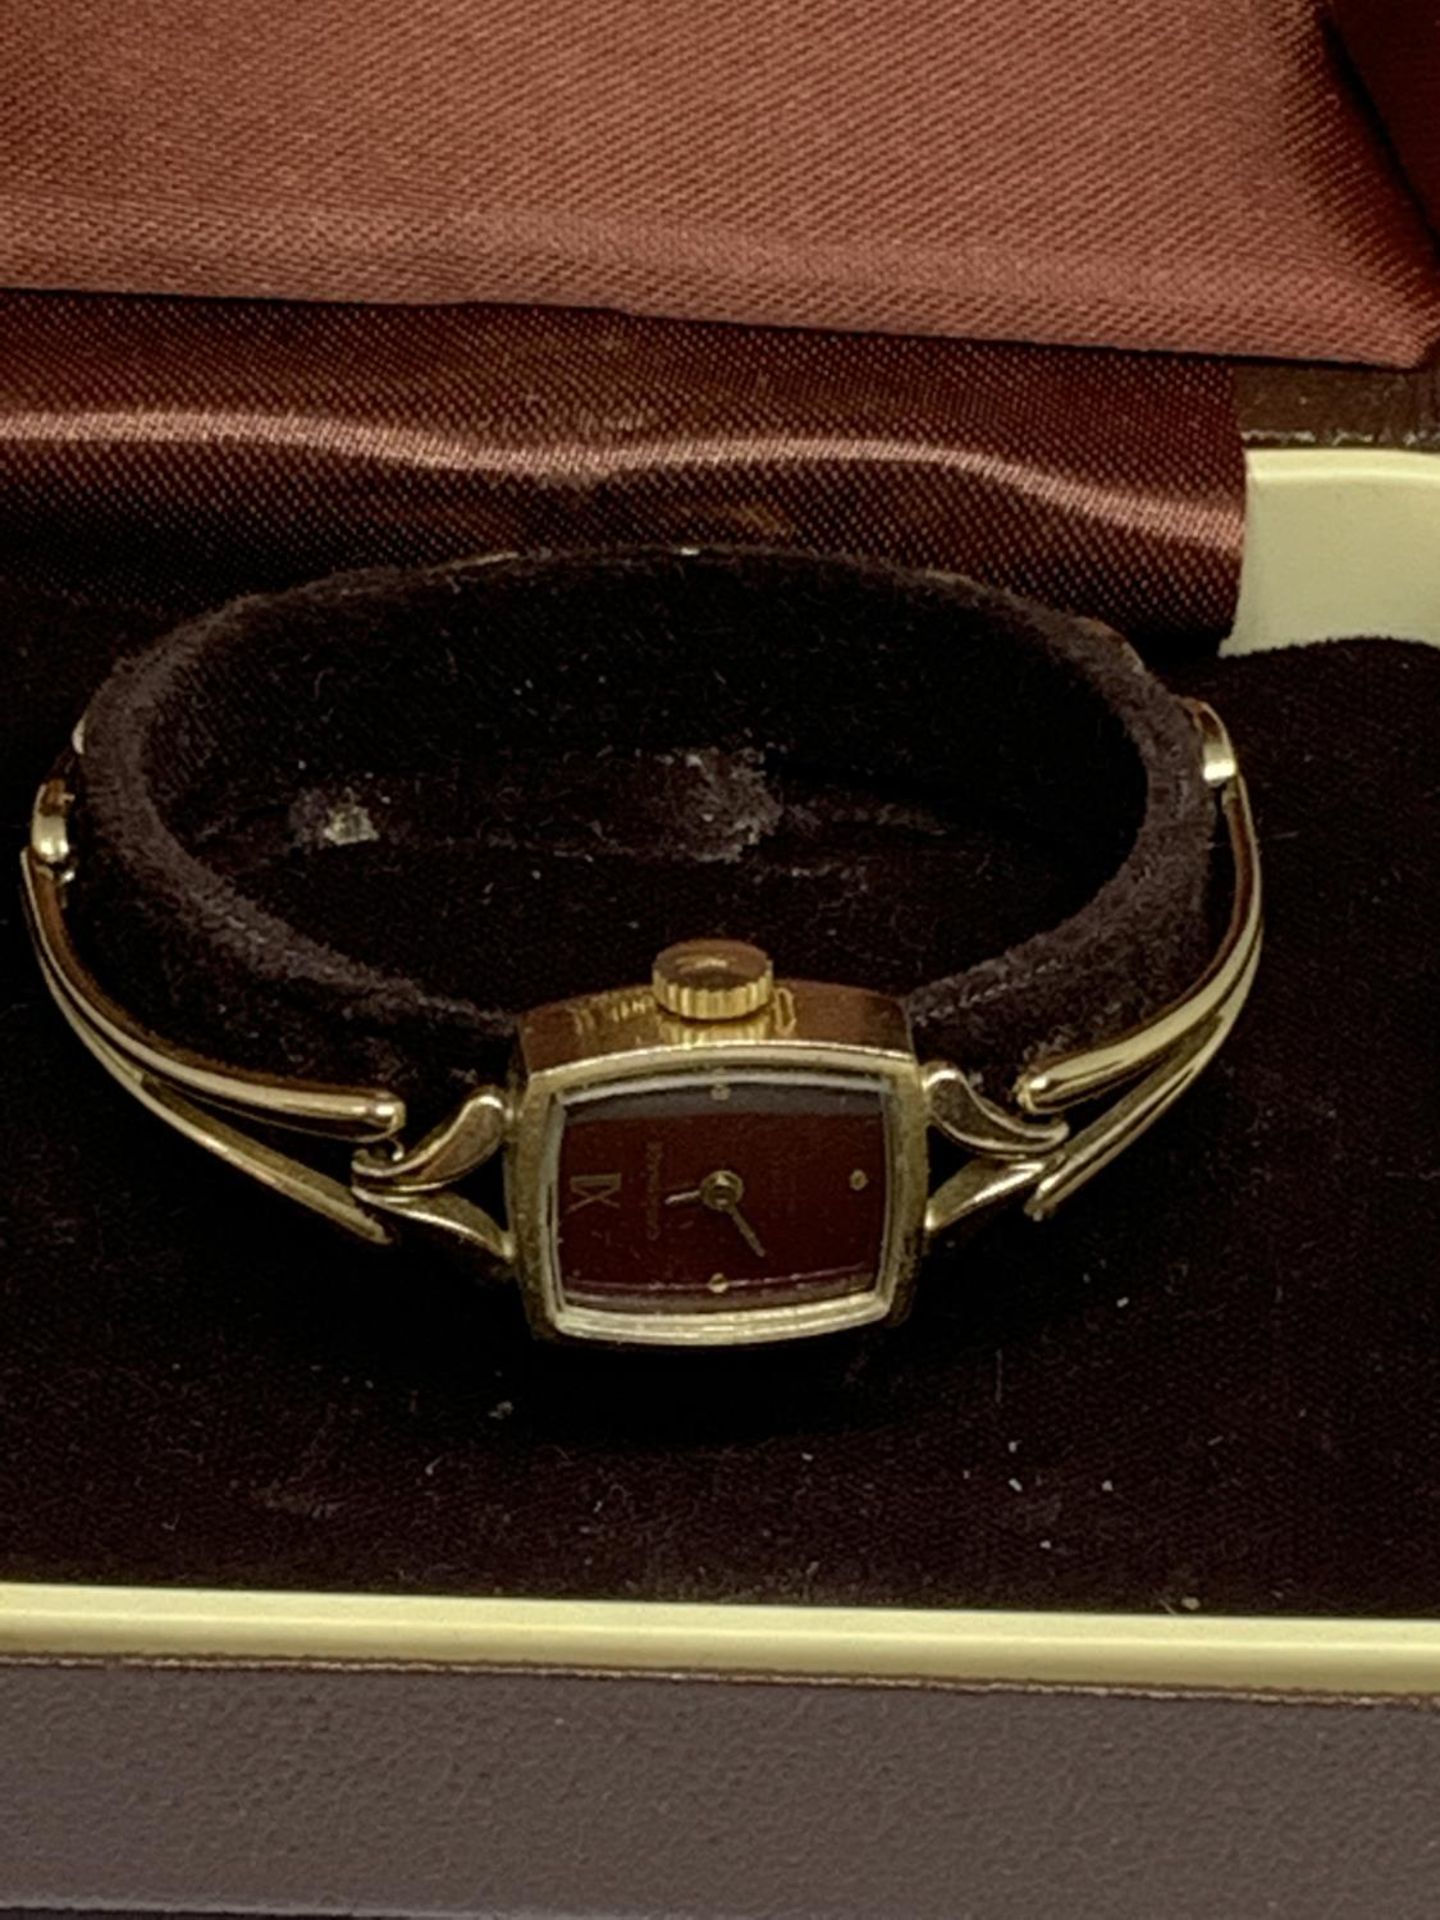 A LADIES CARRONADE WRISTWATCH IN A PRESENTATION BOX SEEN WORKING BUT NO WARRANTY - Image 4 of 4